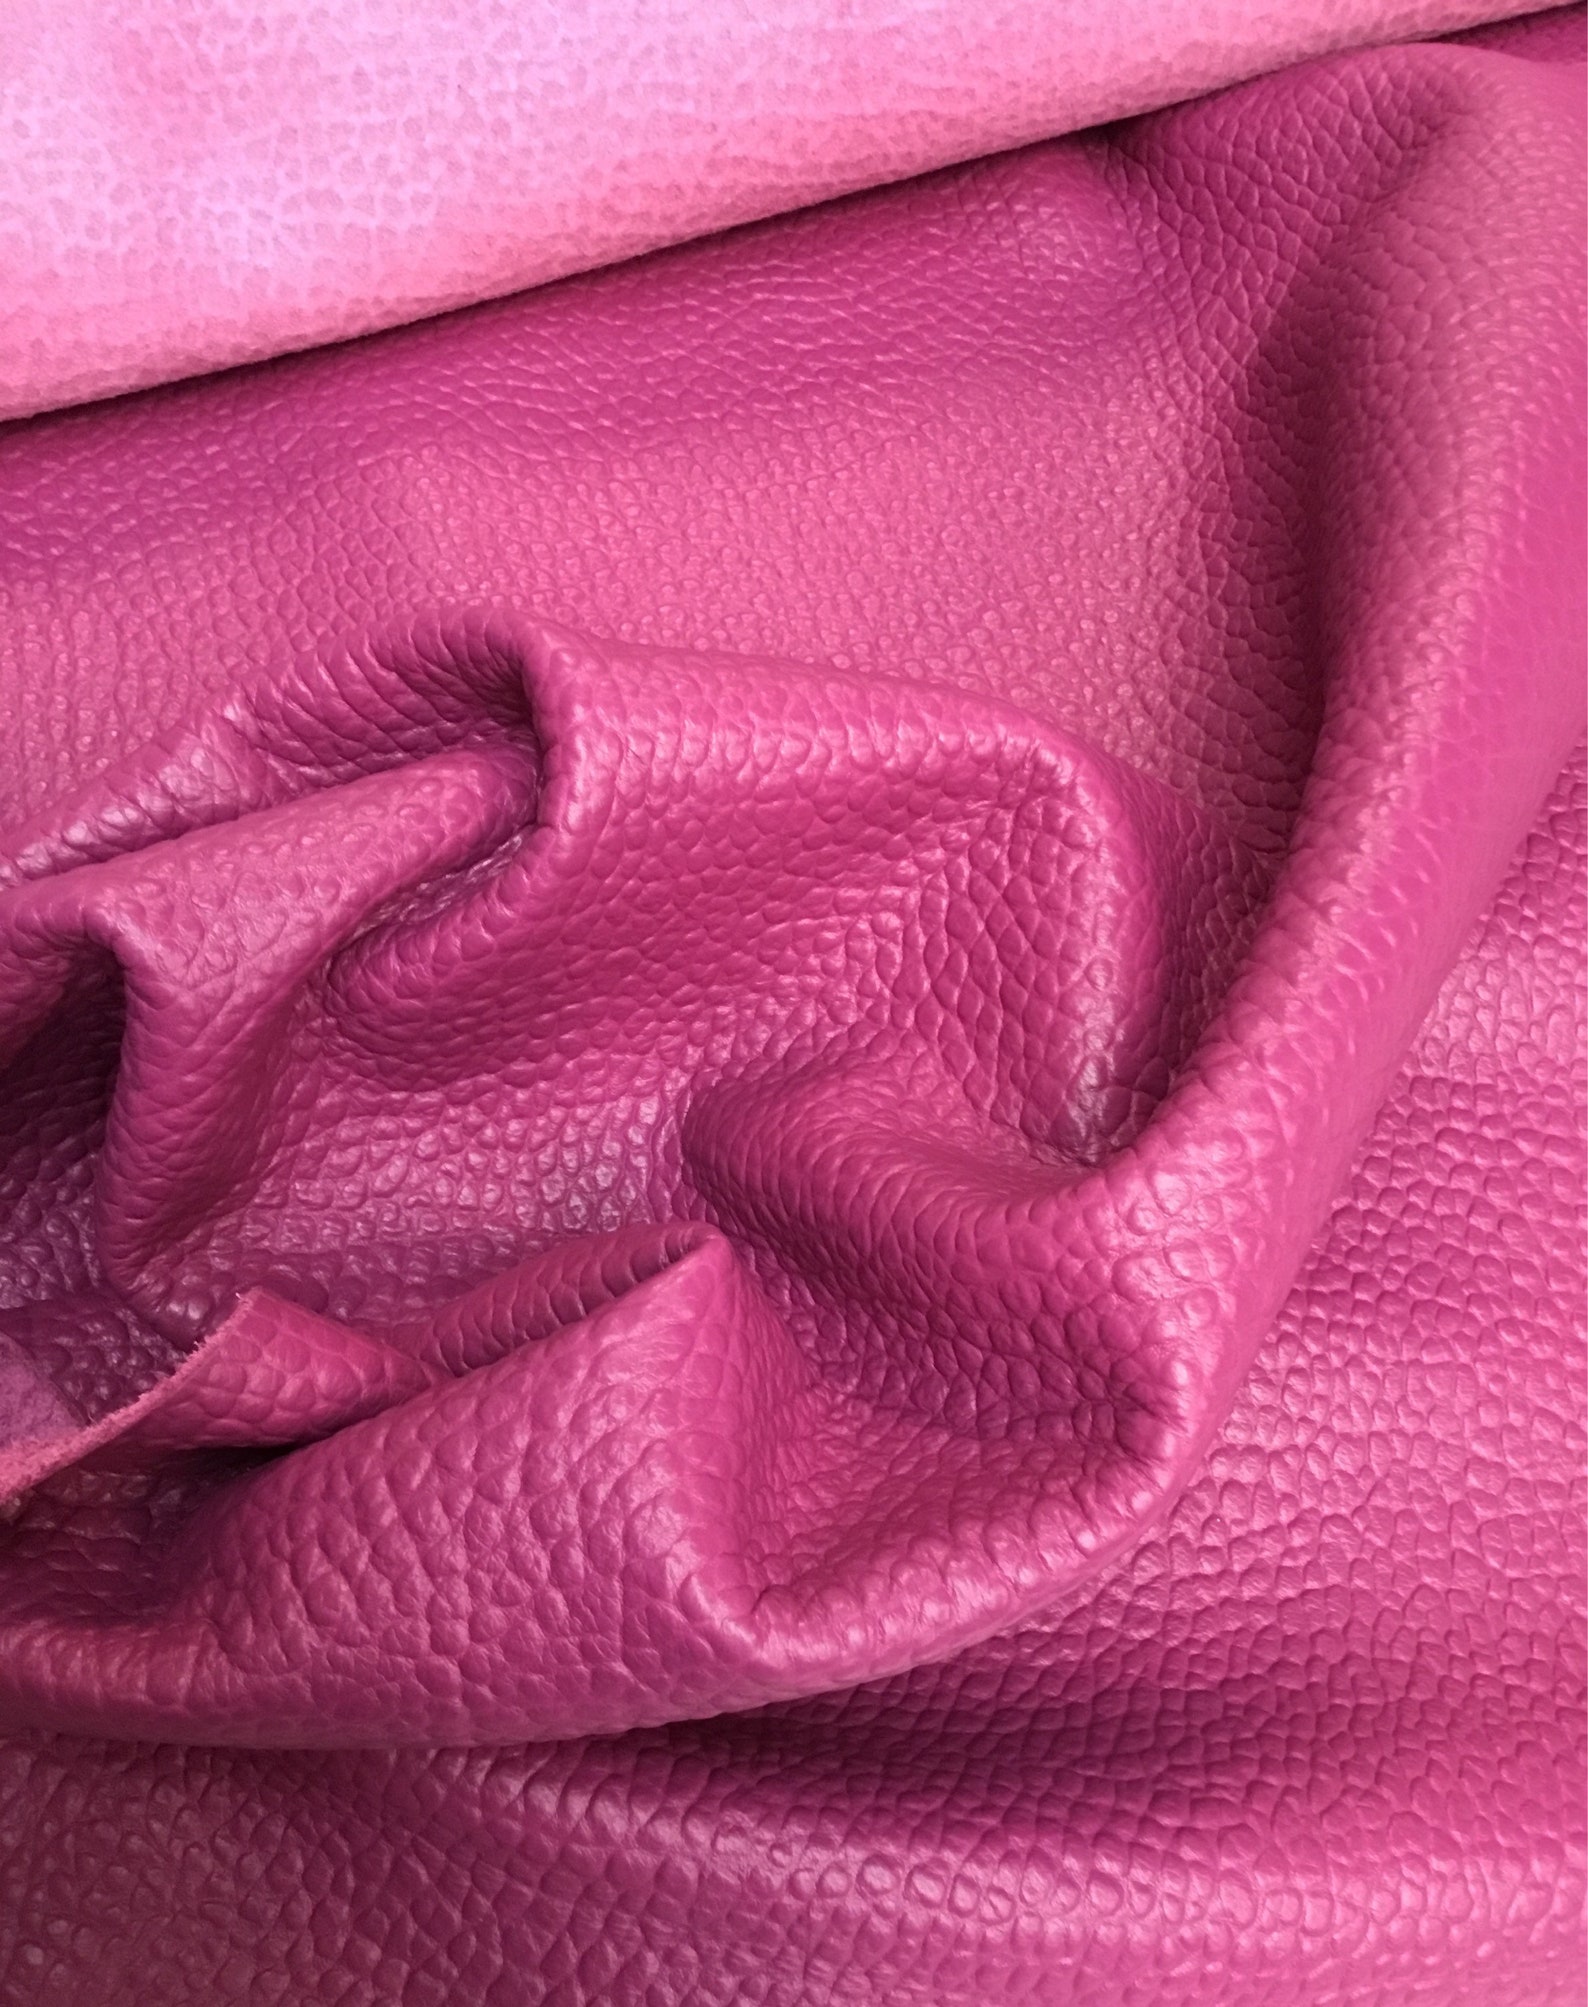 Magenta Italian leather hide. APX 2.0 m2 1.8mm thick | Etsy